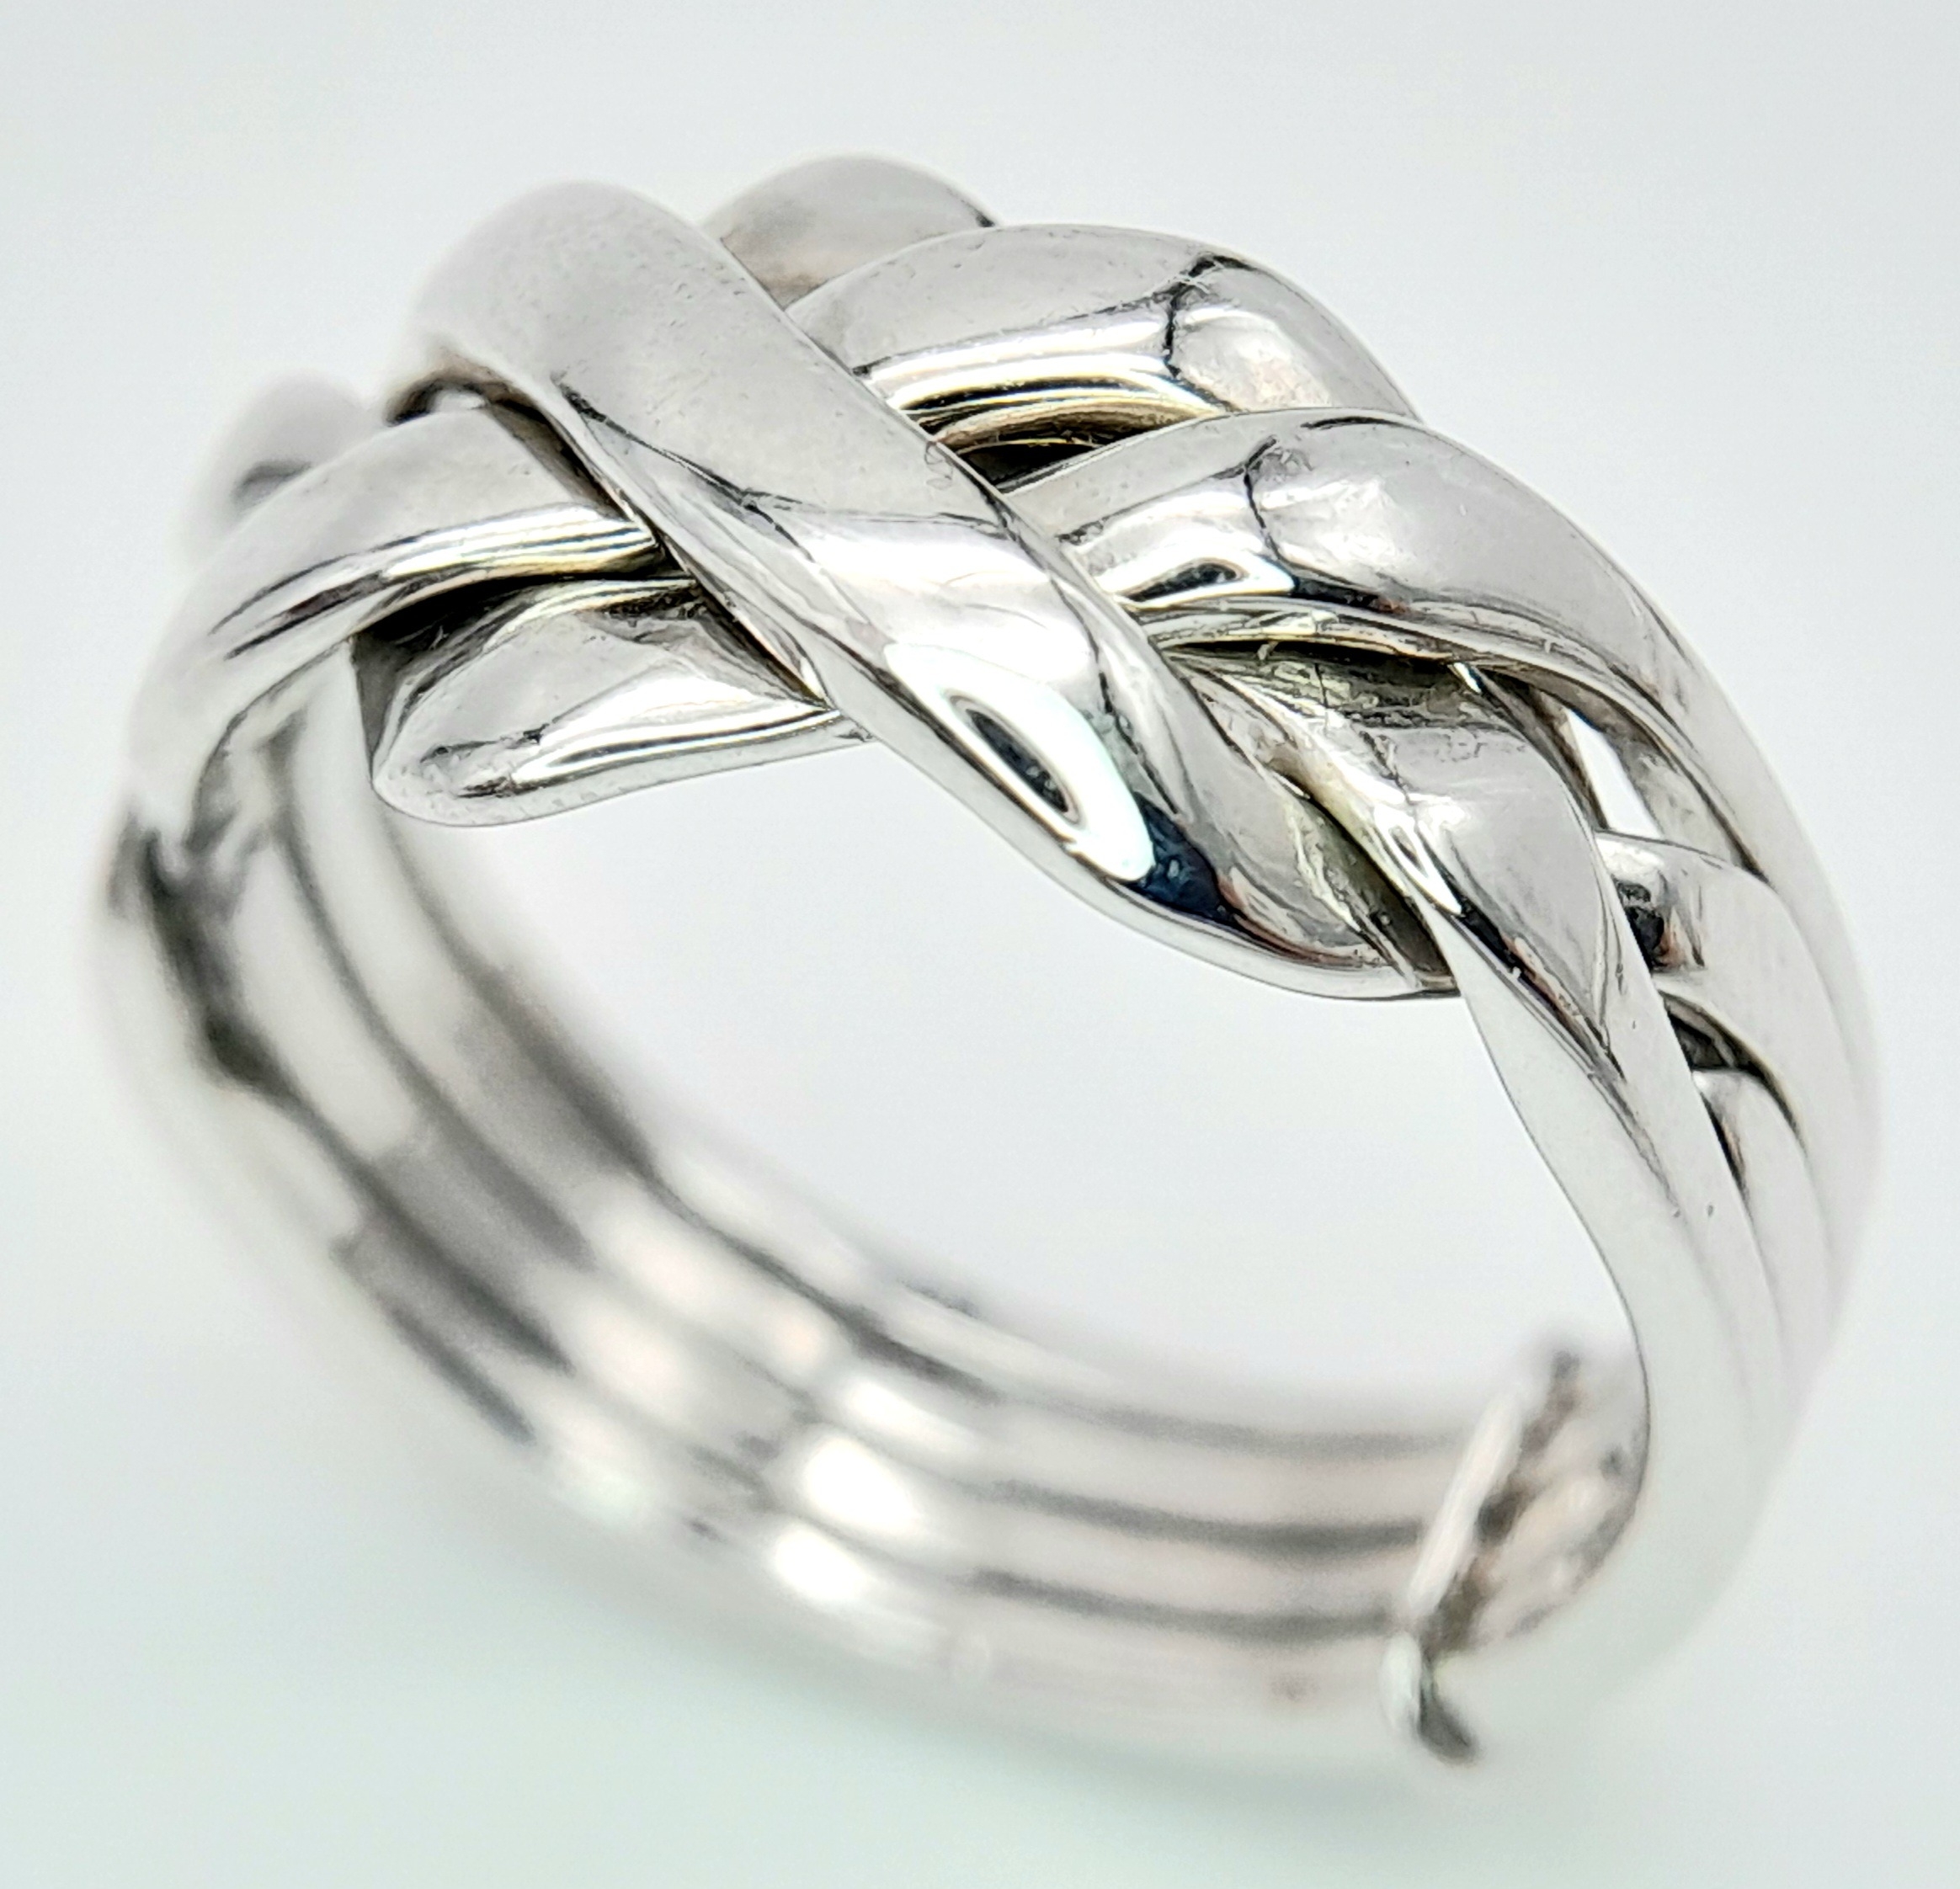 A 9K WHITE GOLD PUZZLE RING. 5.4G. SIZE N. - Image 4 of 5